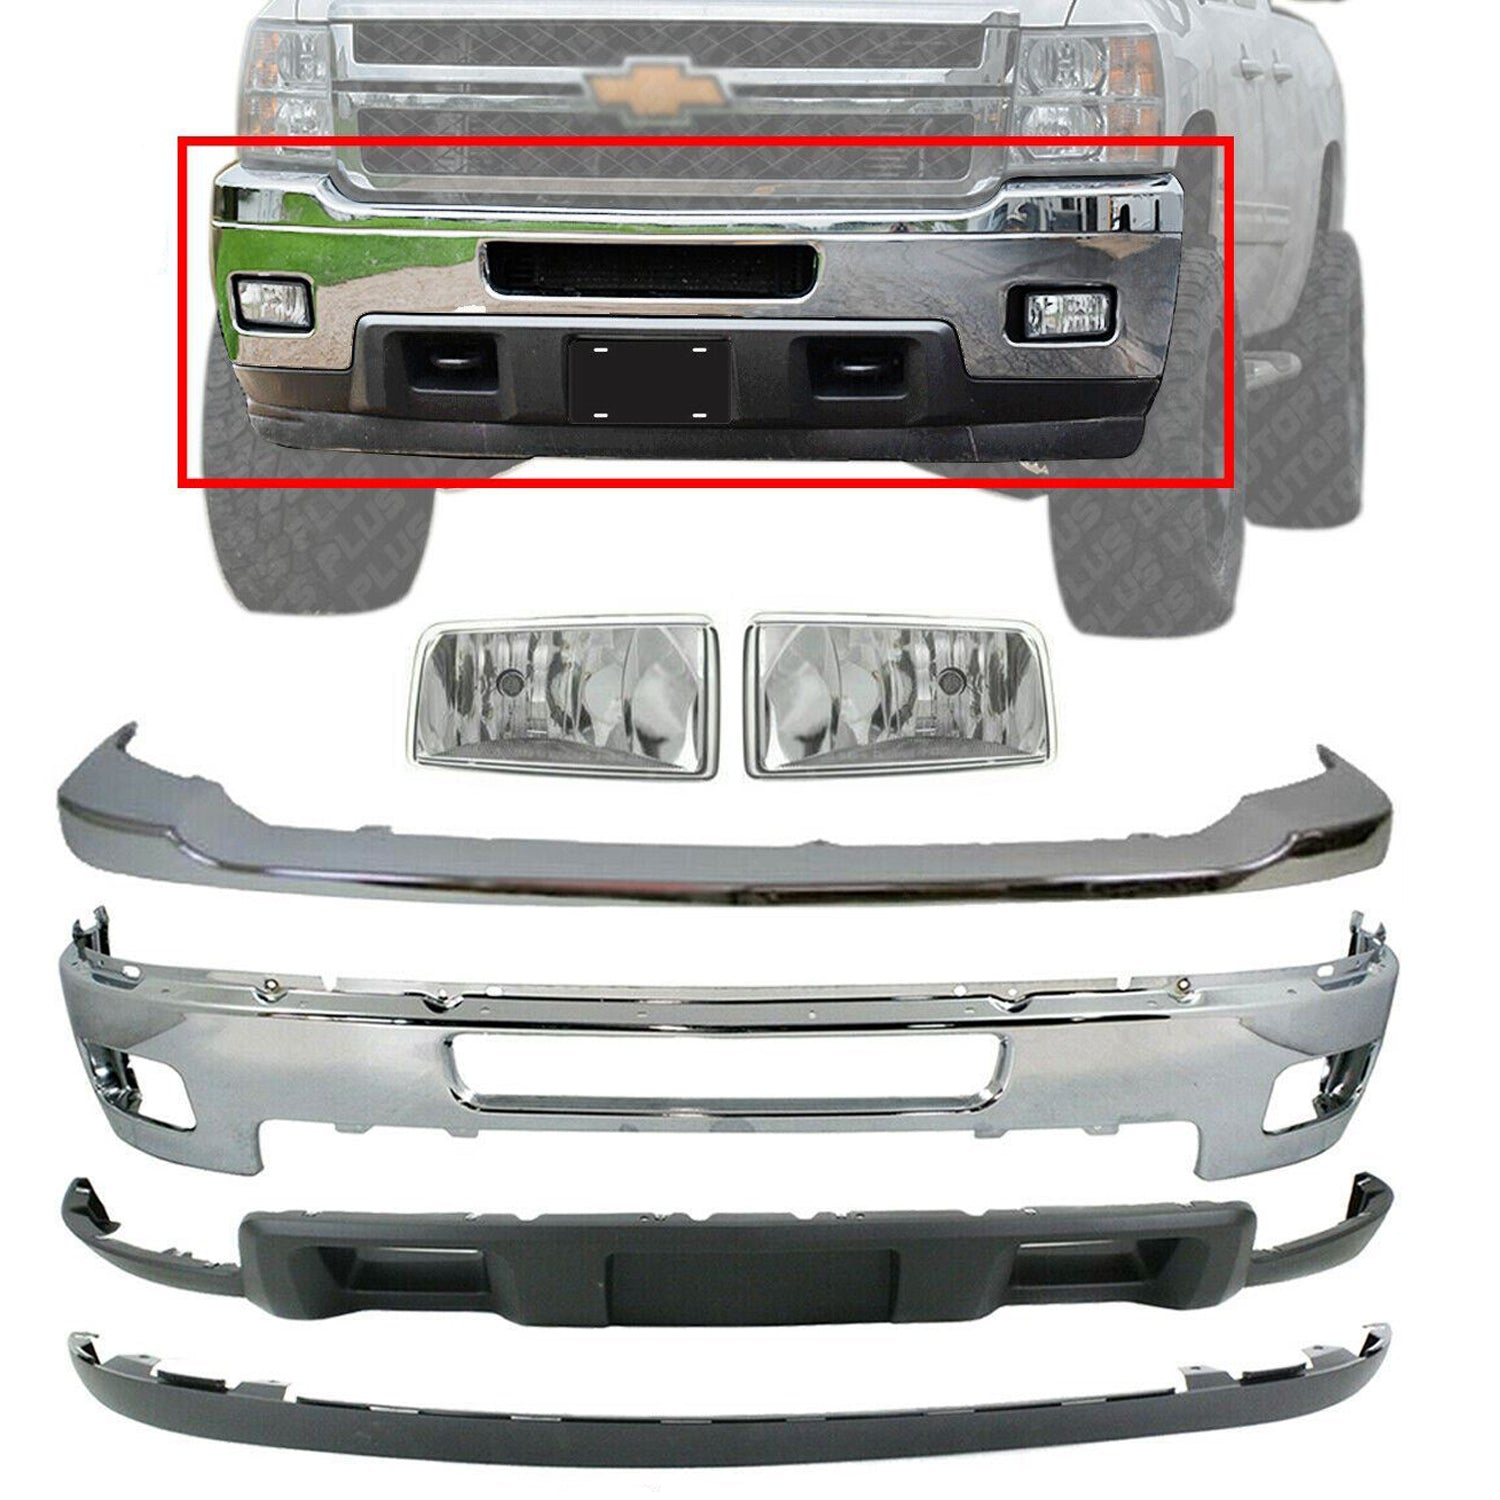 Front Bumper Chrome Kit With Fog Light For 2011-2014 Chevy